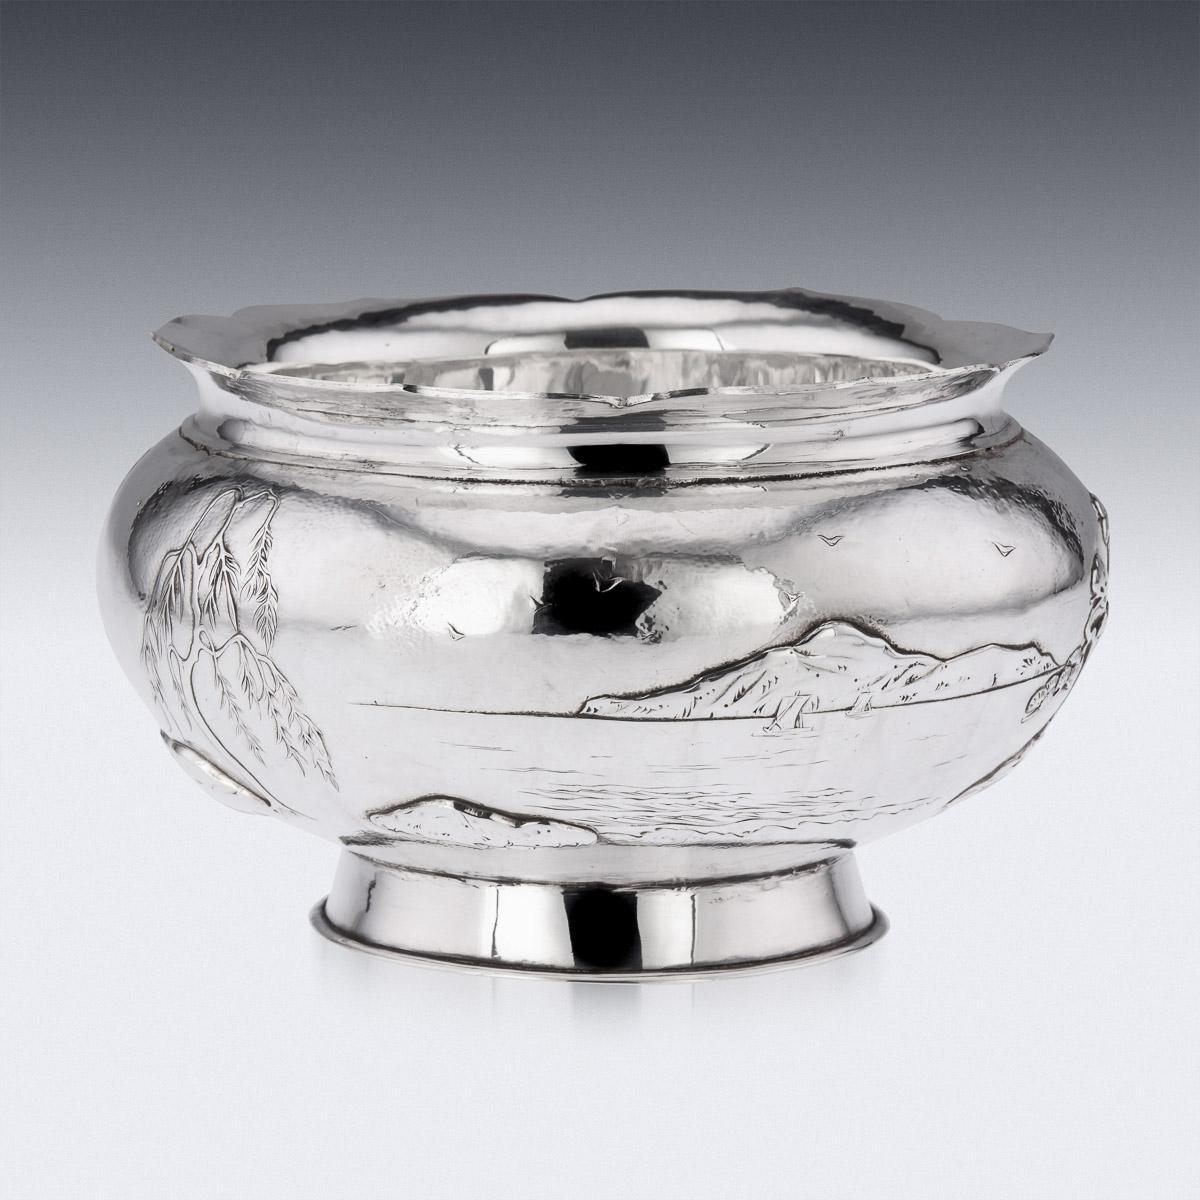 20th Century Meiji Japanese Solid Silver Fuji Mountain Bowl, c.1900 For Sale 1